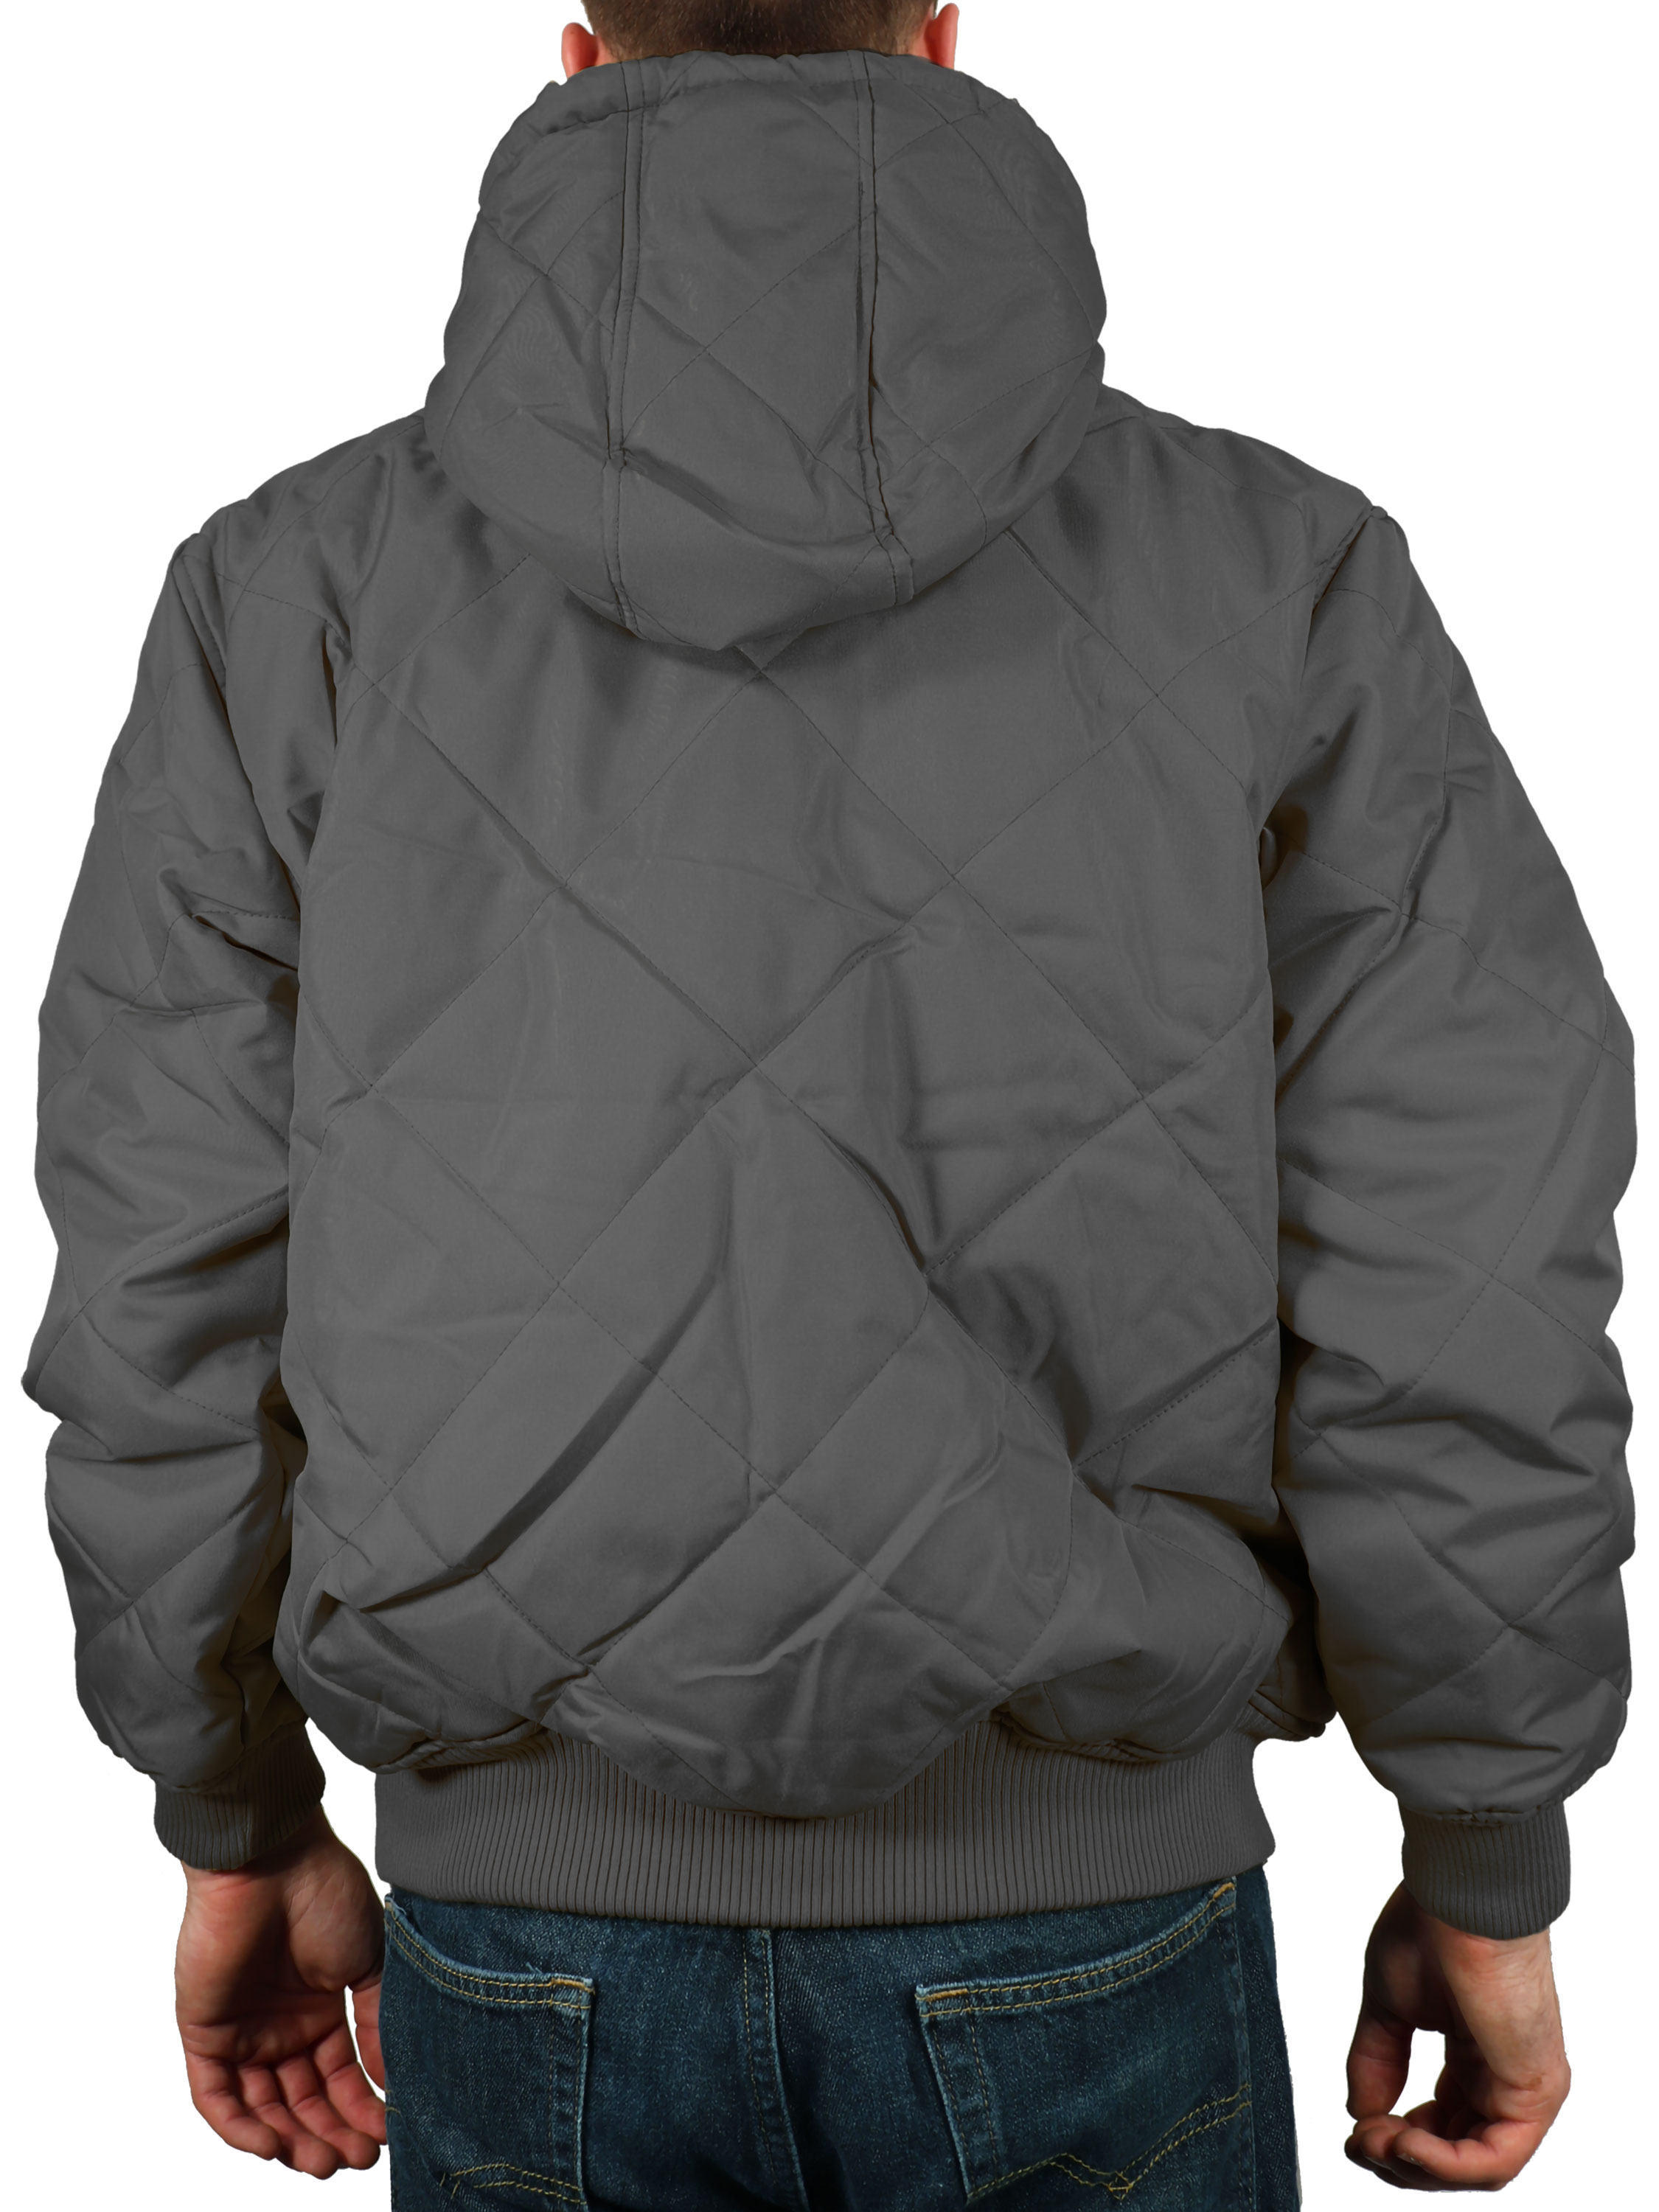 Freeze Defense Men's Quilted Spring, Fall & Winter Jacket